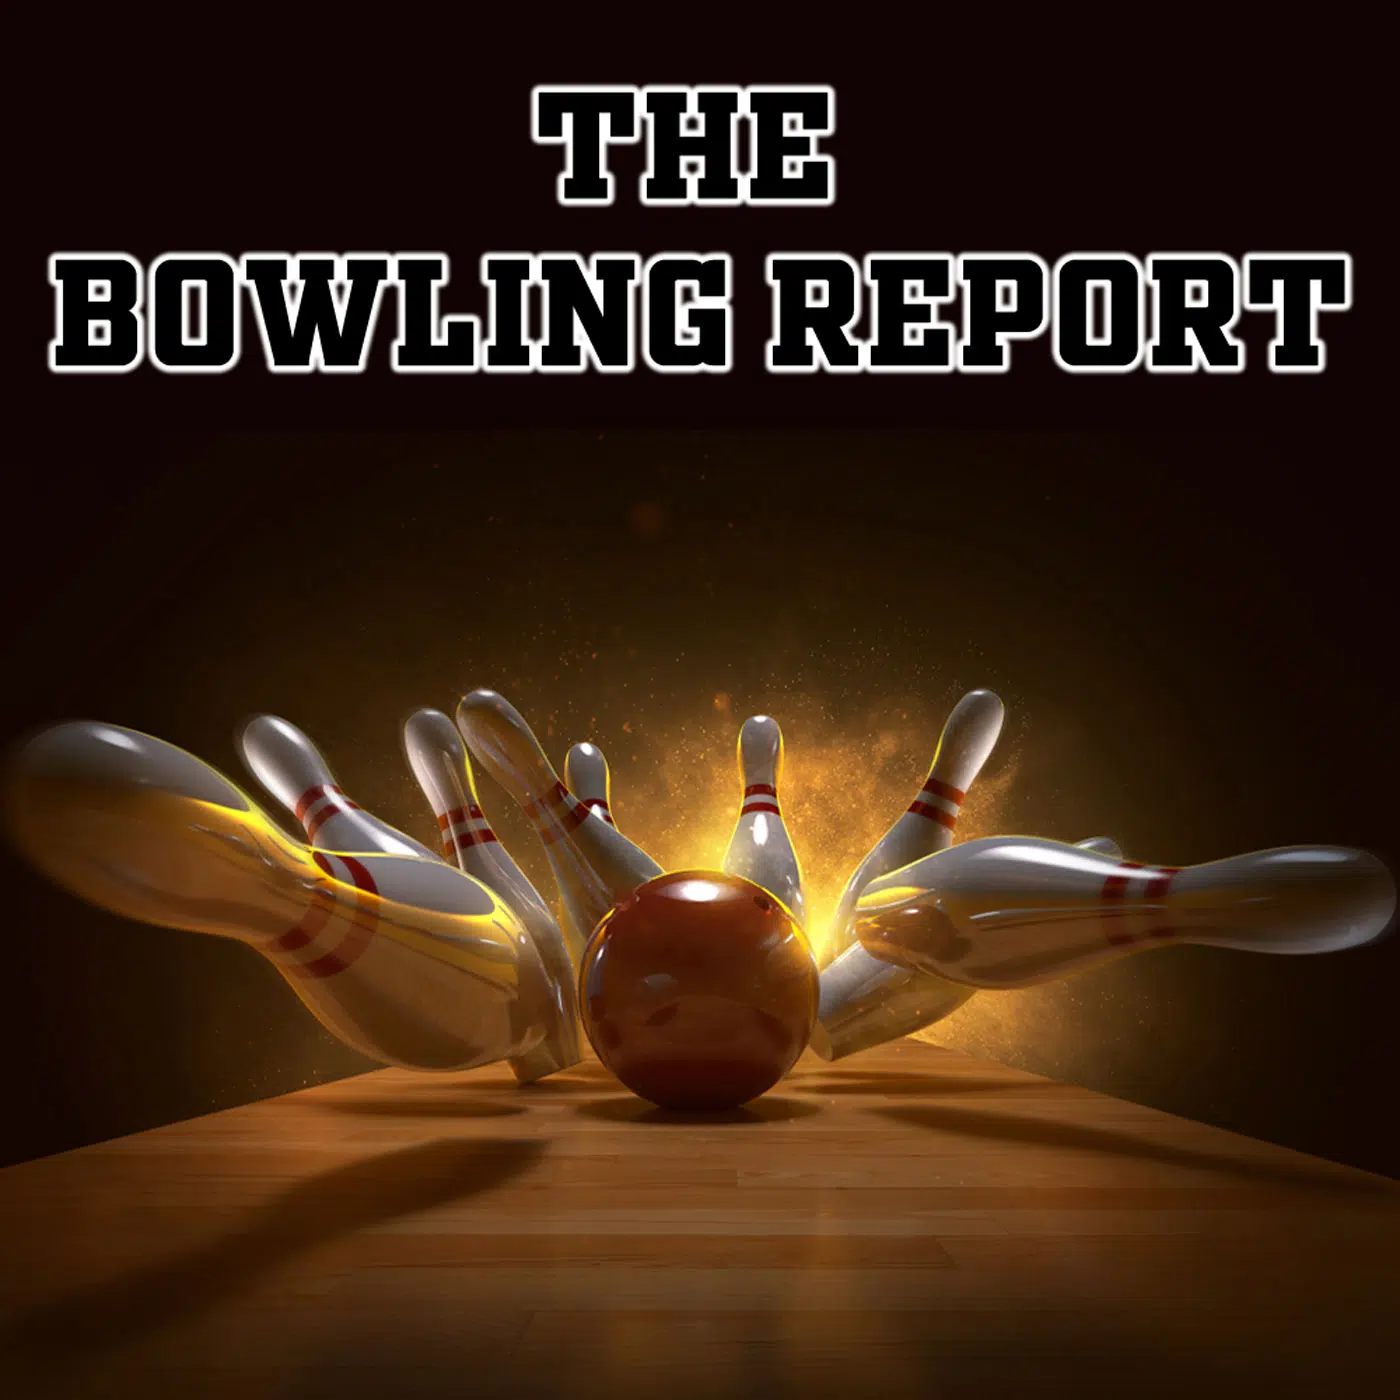 The Bowling Report